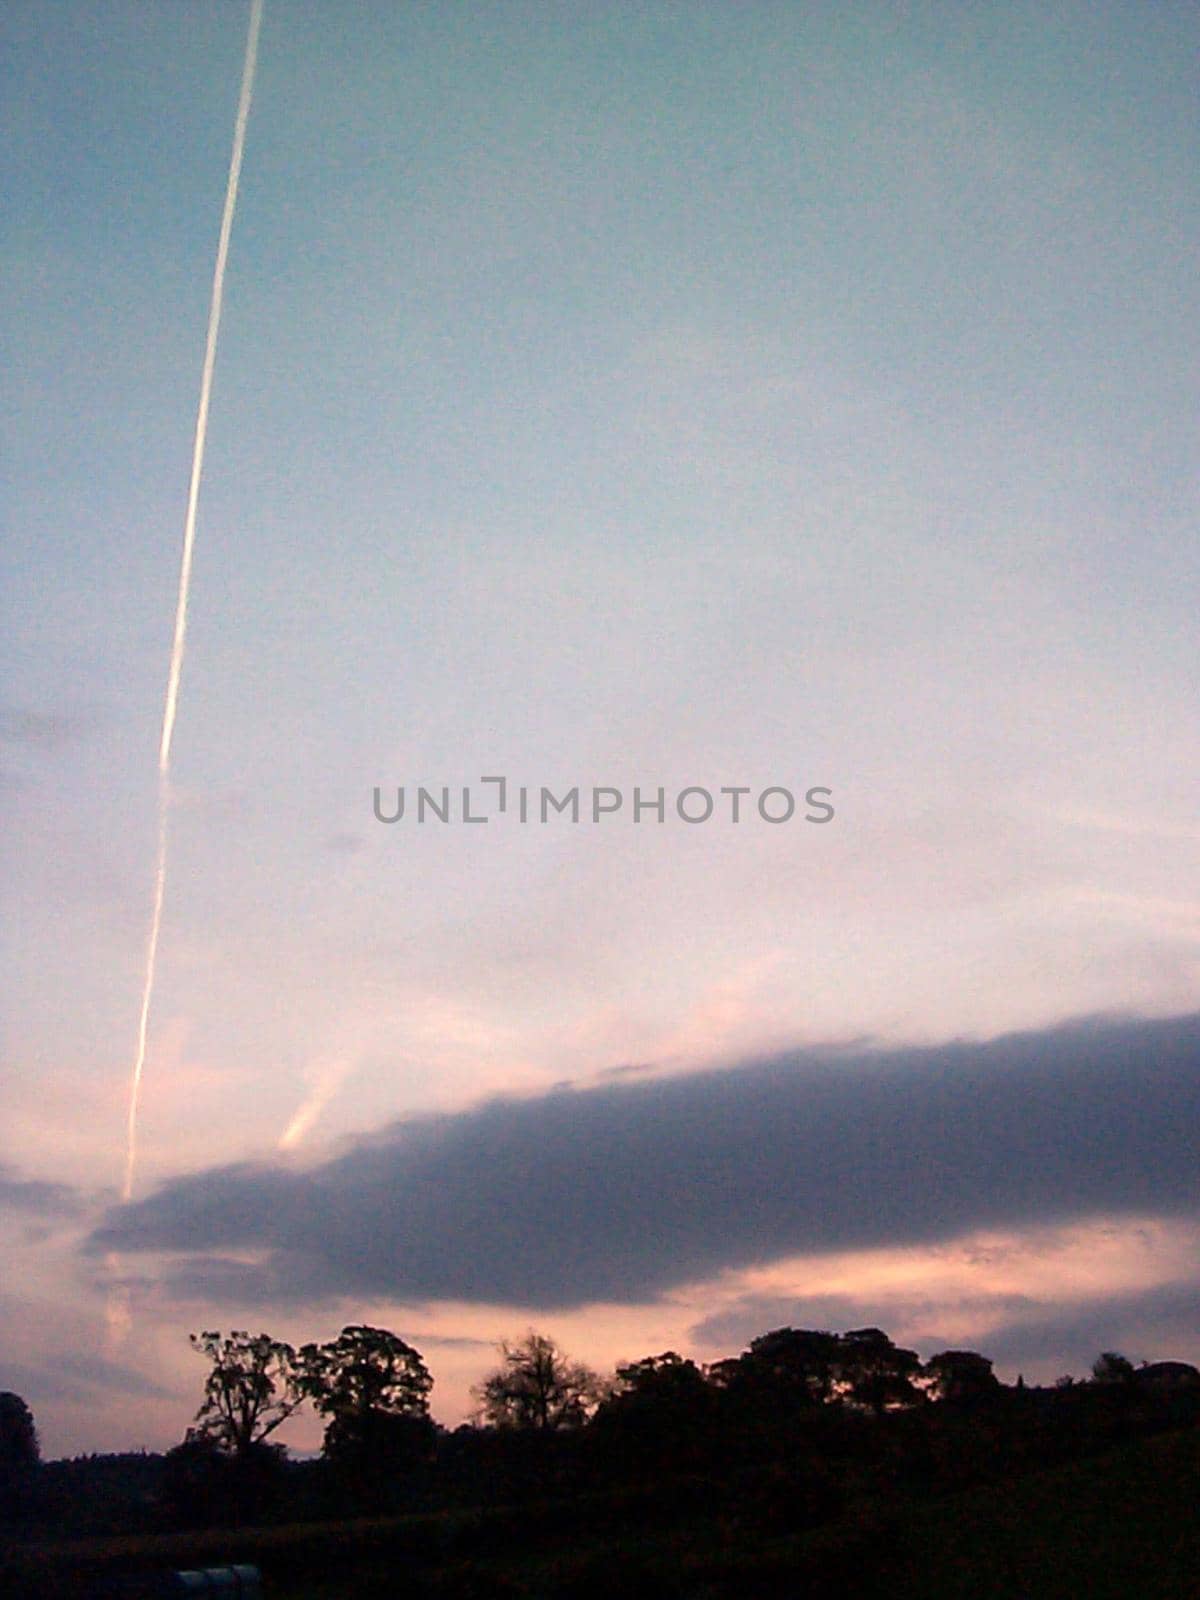 Trees silhouetted against a pink sunset at dusk with a contrail from a jet streaking through the sky, with copyspace